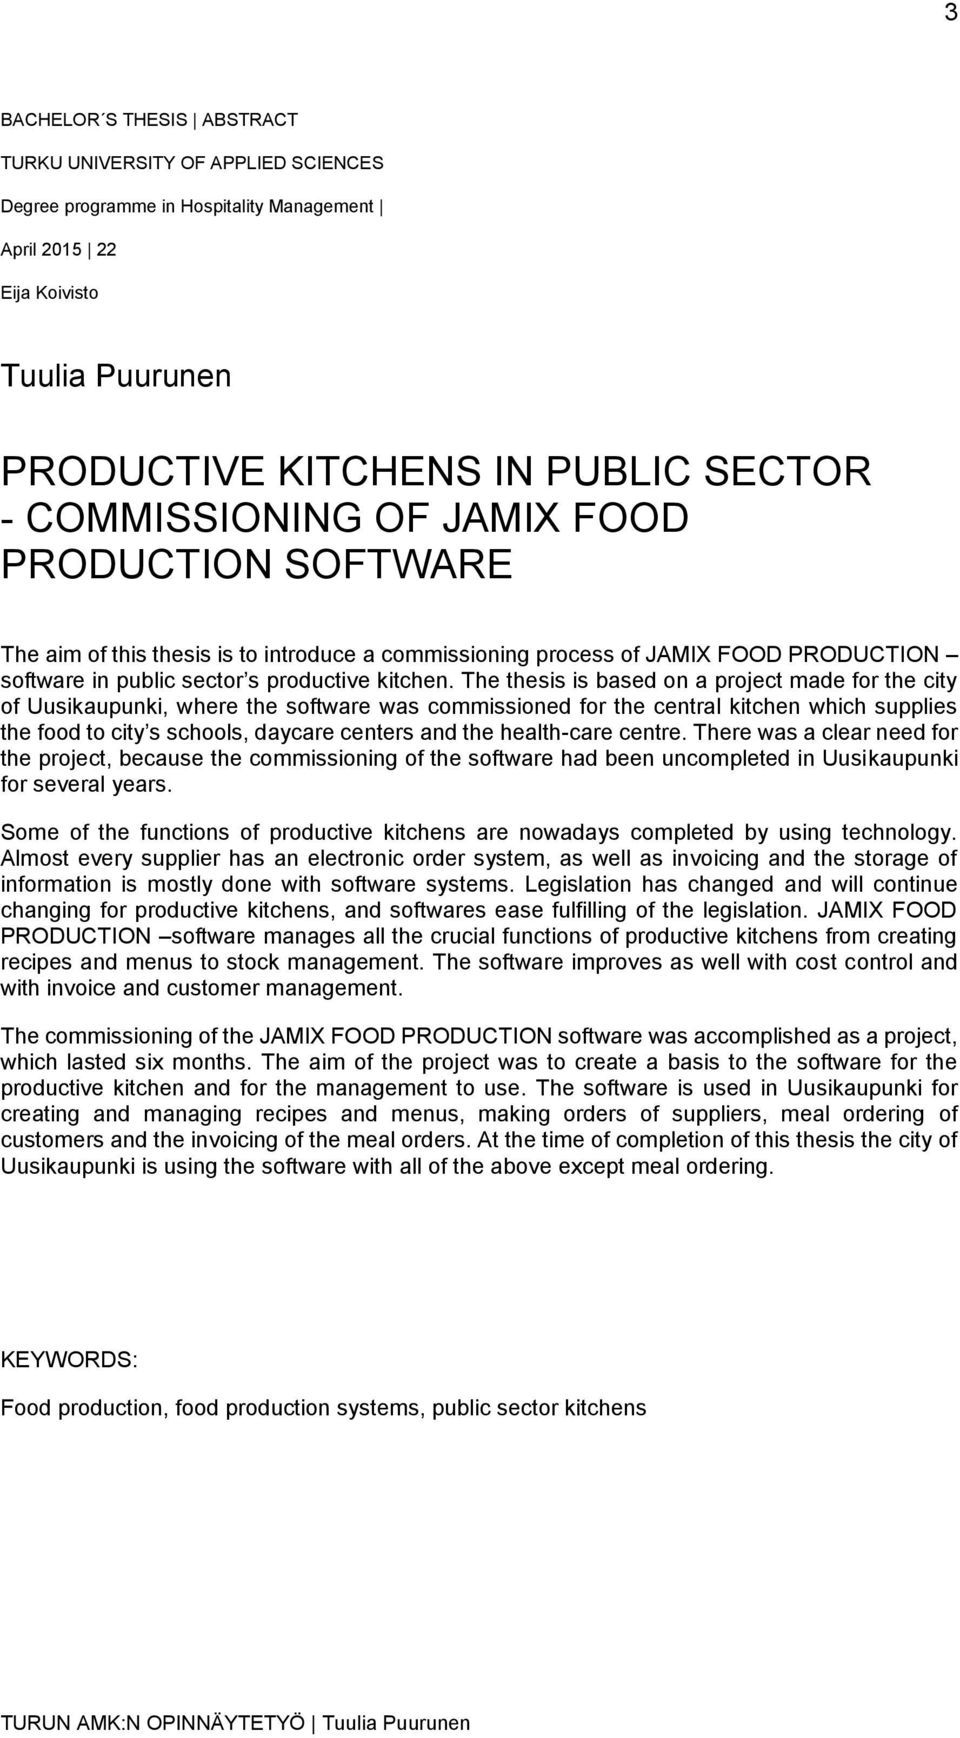 The thesis is based on a project made for the city of Uusikaupunki, where the software was commissioned for the central kitchen which supplies the food to city s schools, daycare centers and the